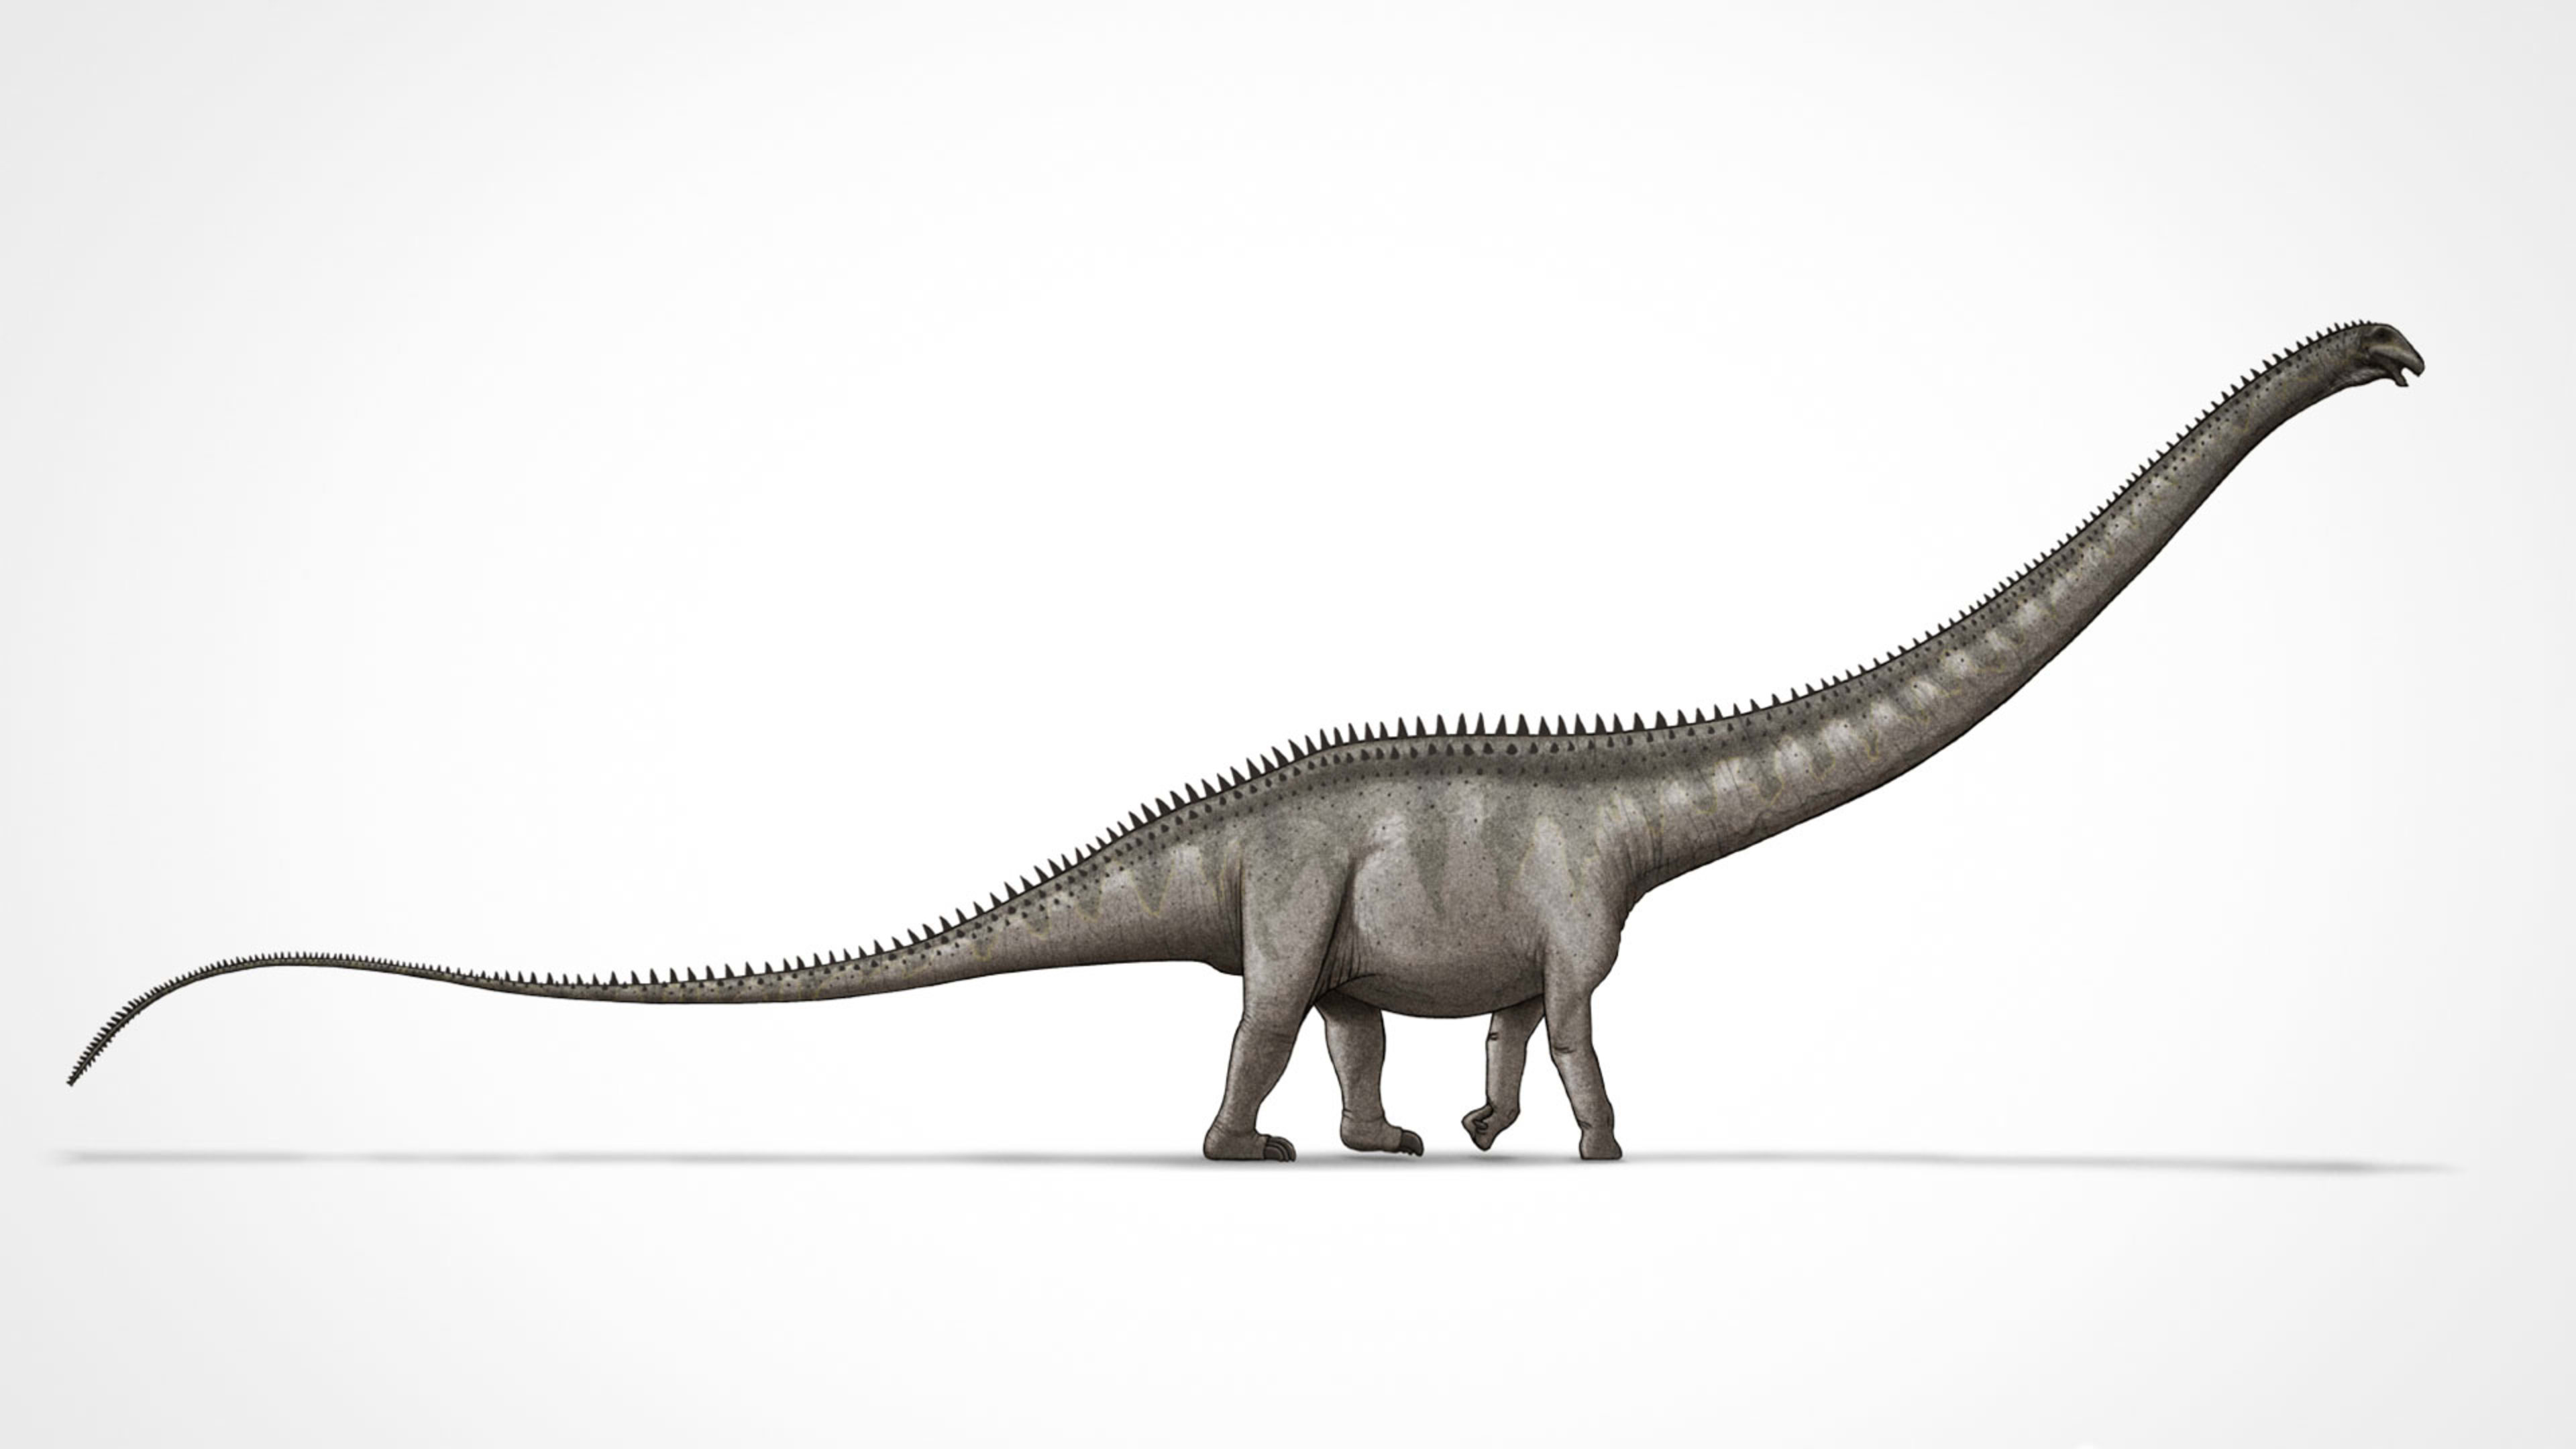 At 137 feet, the new Supersaurus might be the longest dinosaur ever, scientists say